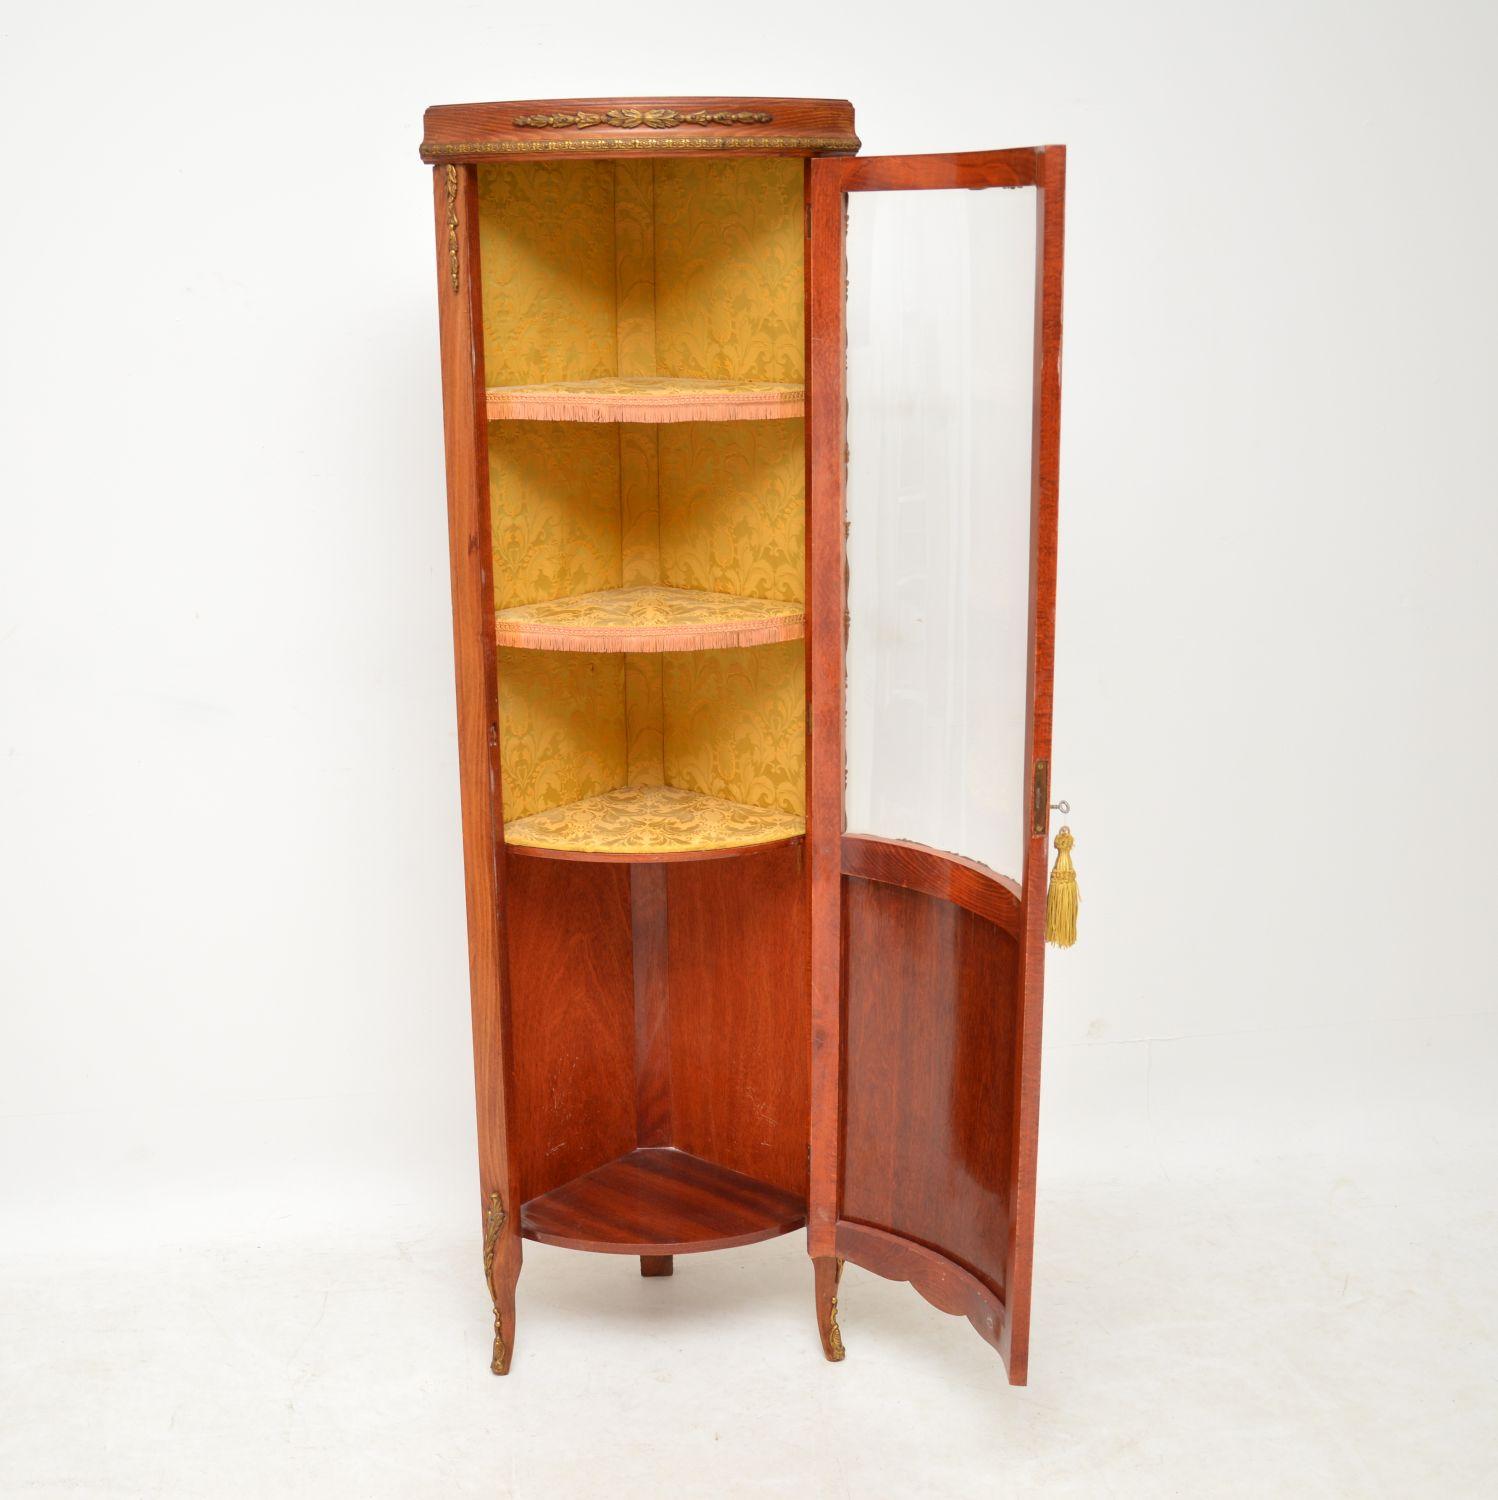 Mid-20th Century Antique French Inlaid Marquetry Corner Cabinet